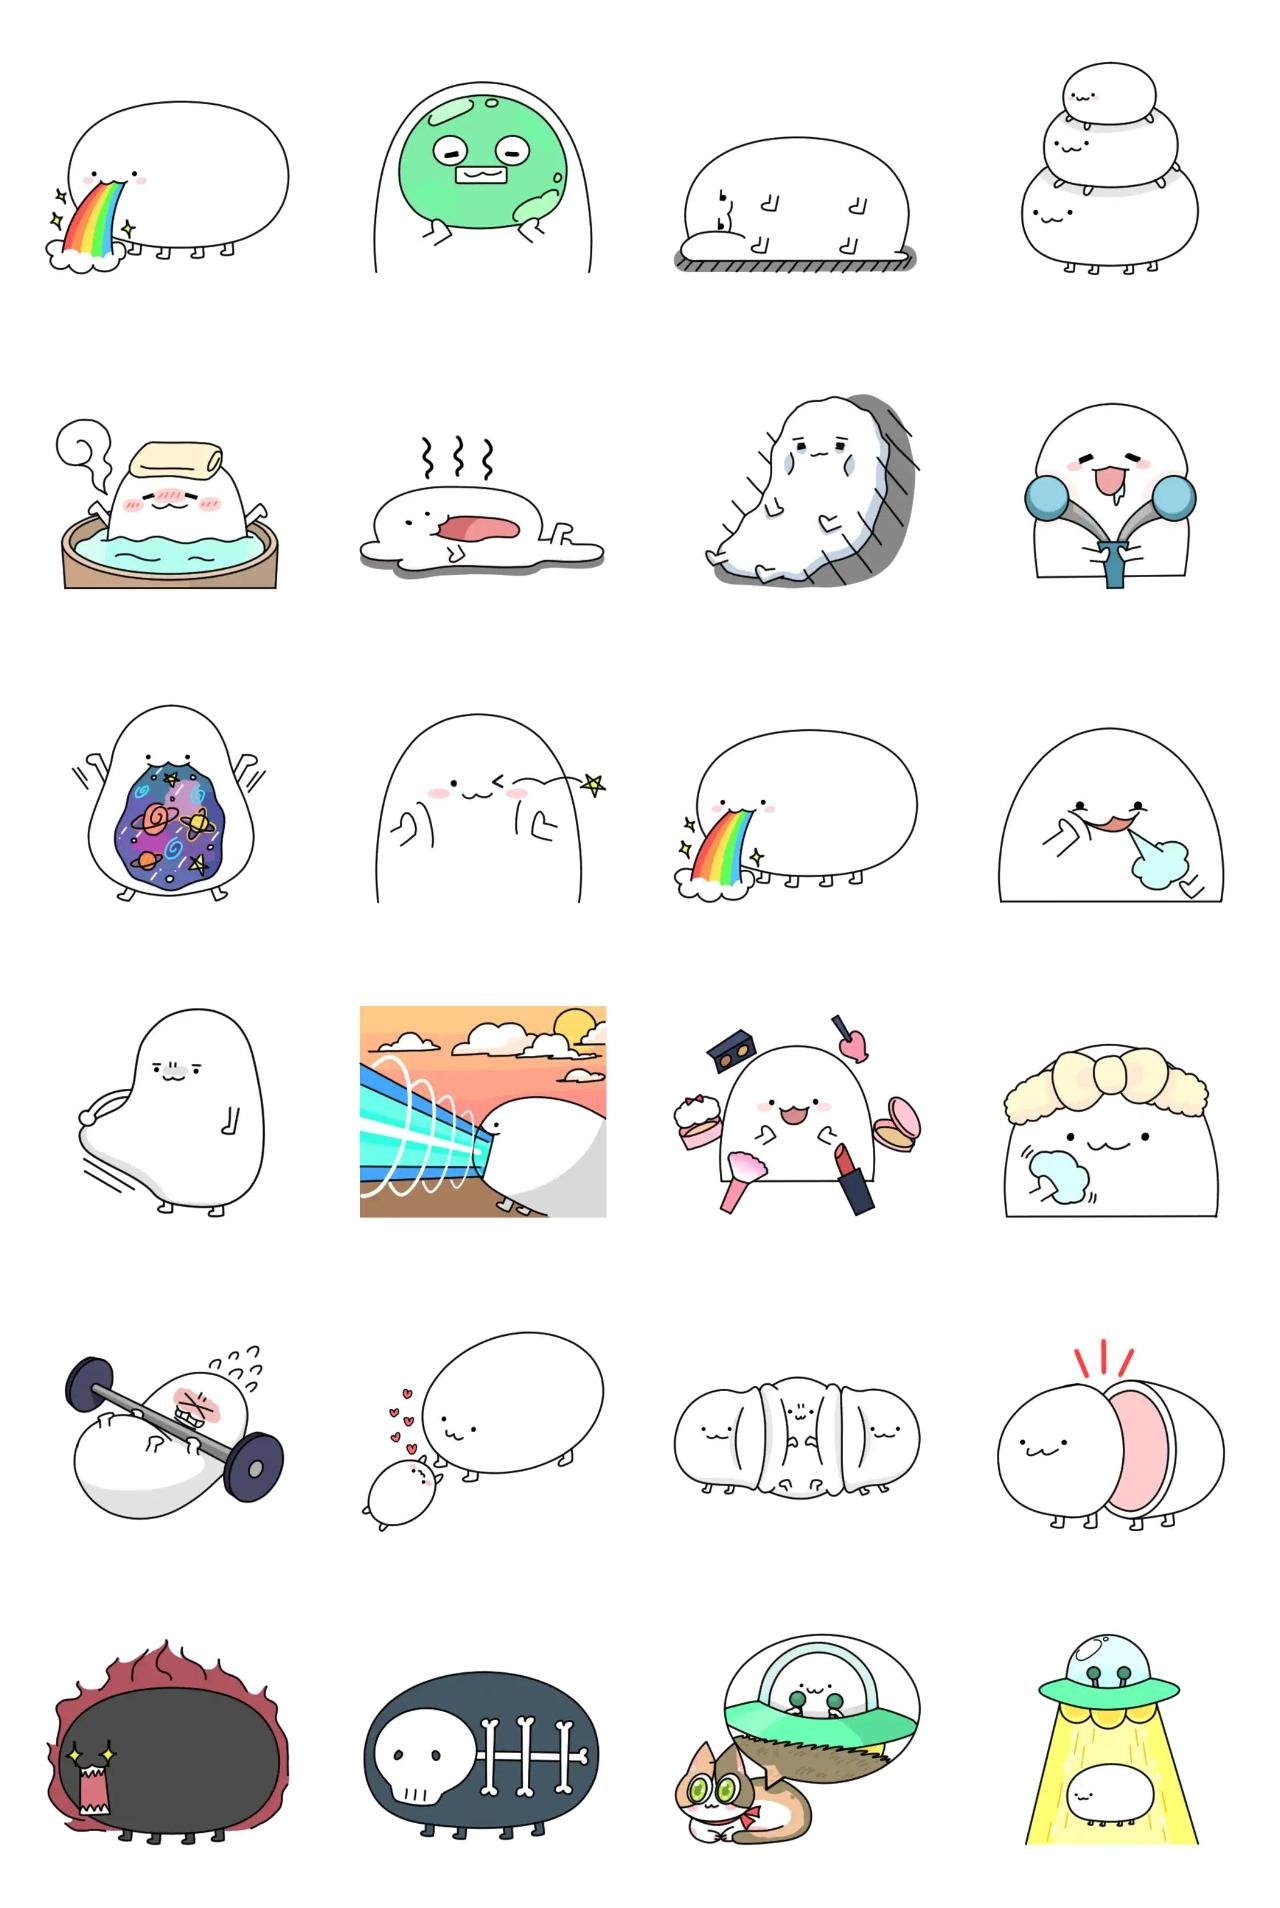 Strange Monster From Outer Space Animals,Gag sticker pack for Whatsapp, Telegram, Signal, and others chatting and message apps